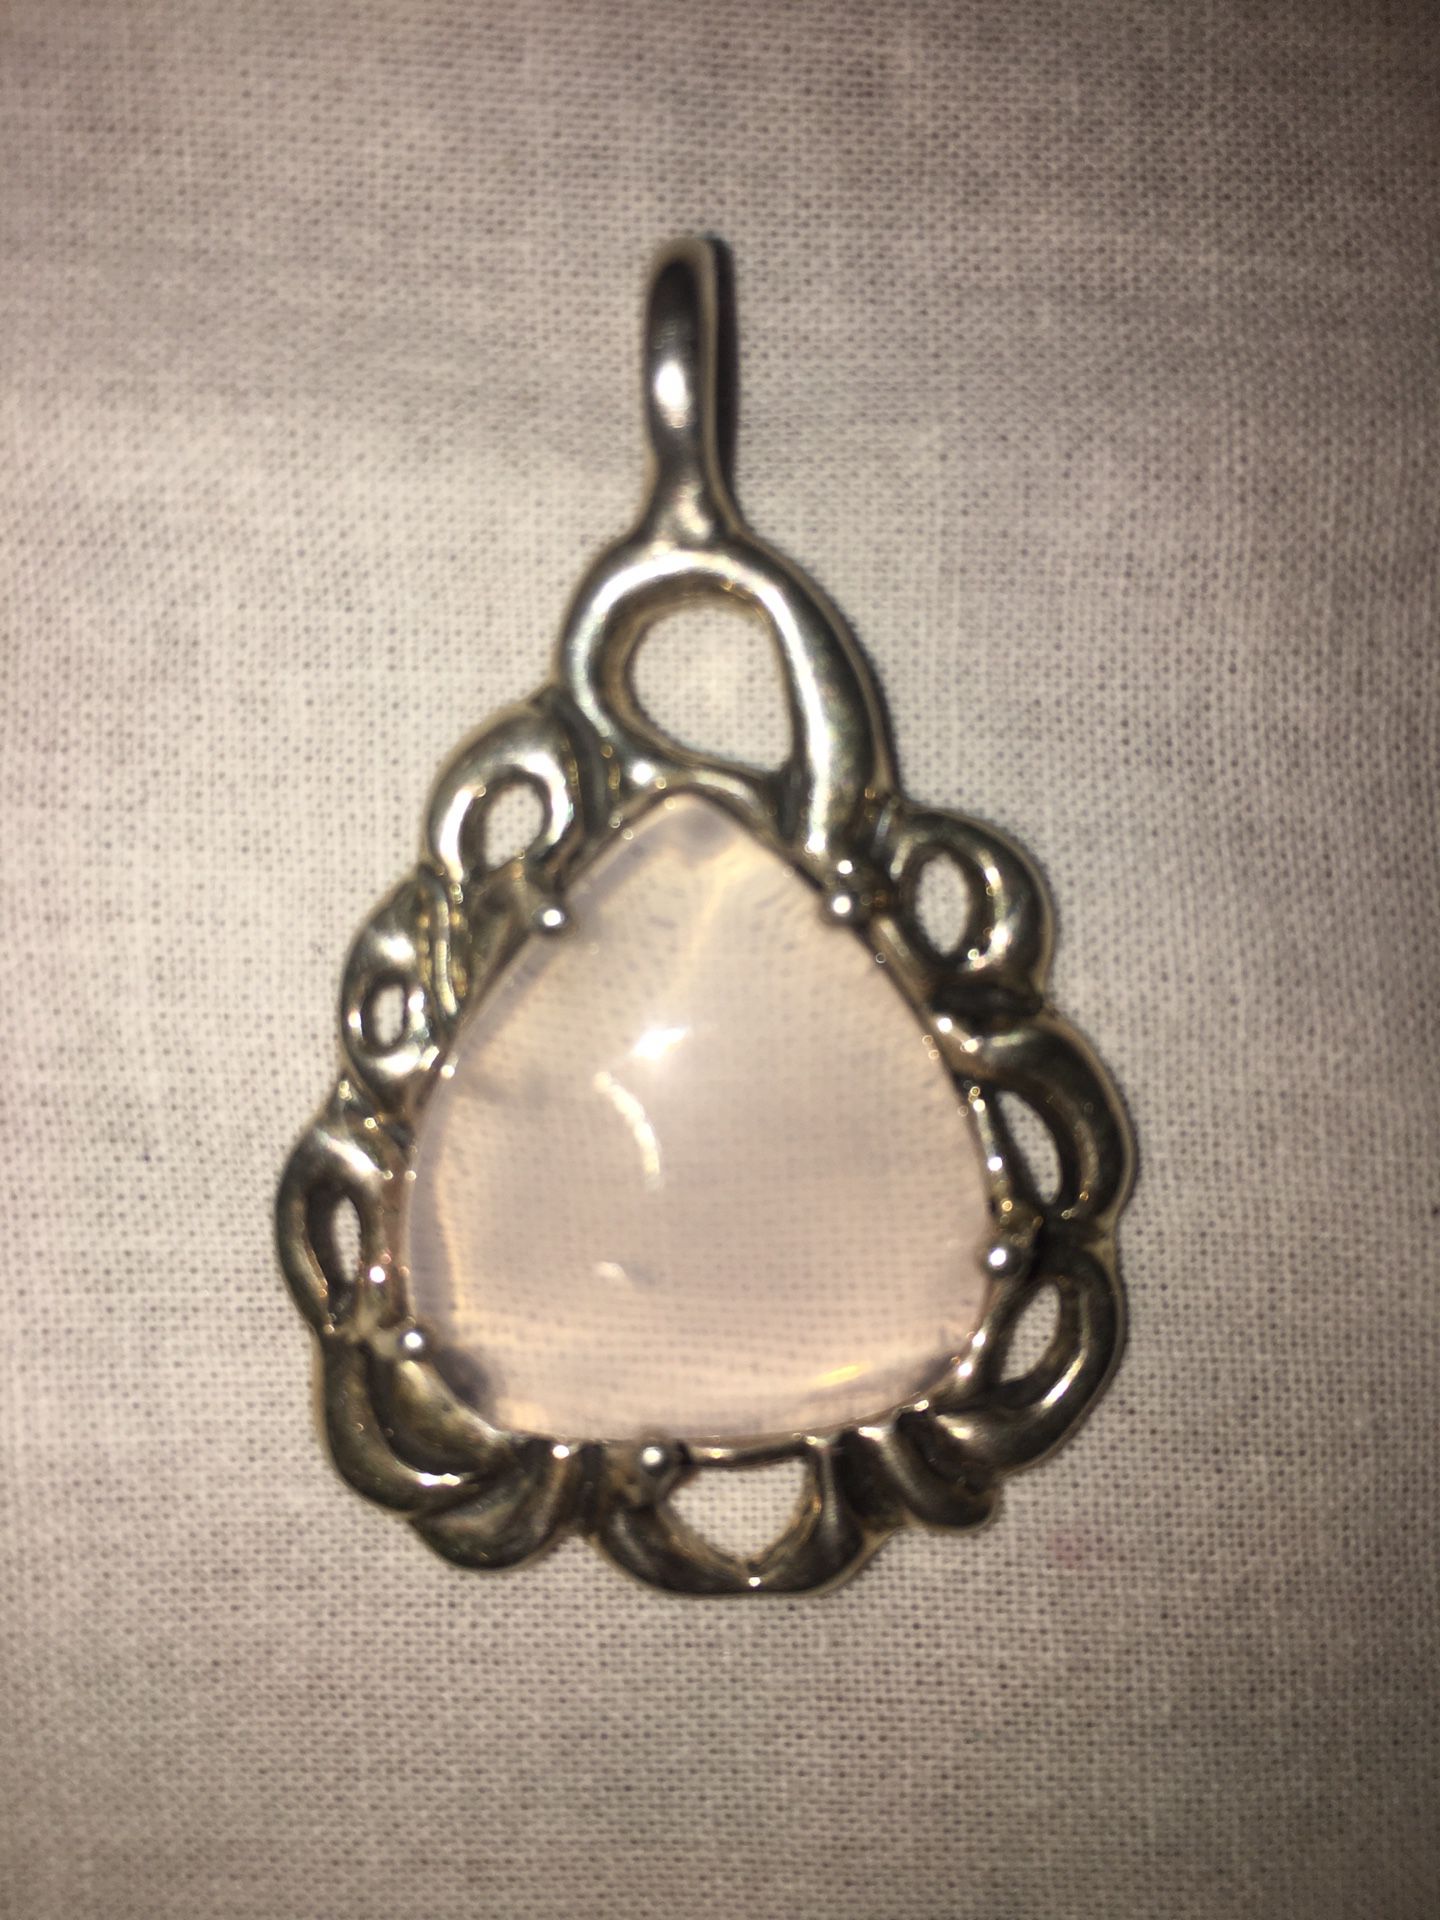 Moonstone in sterling silver pendant